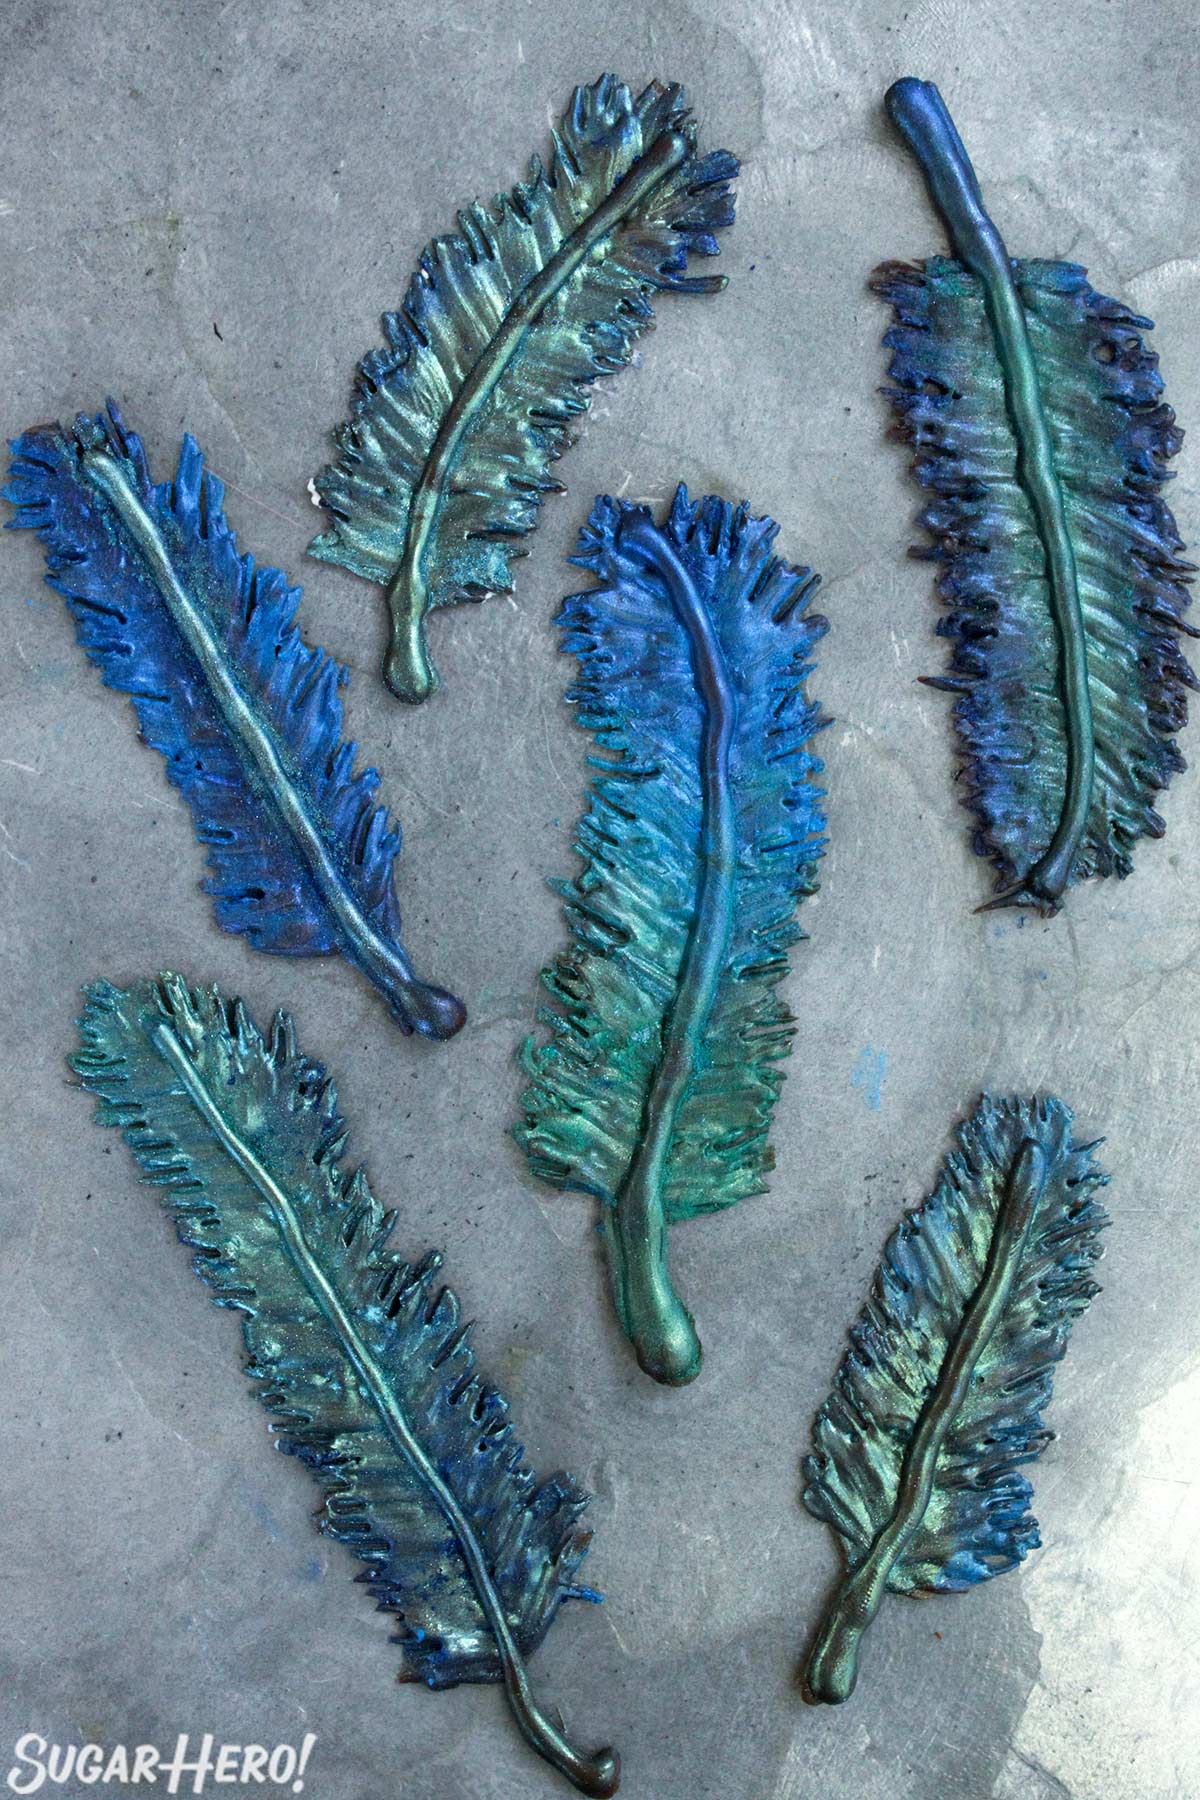 Chocolate feathers painted with blue and green luster dust on a silver platter.